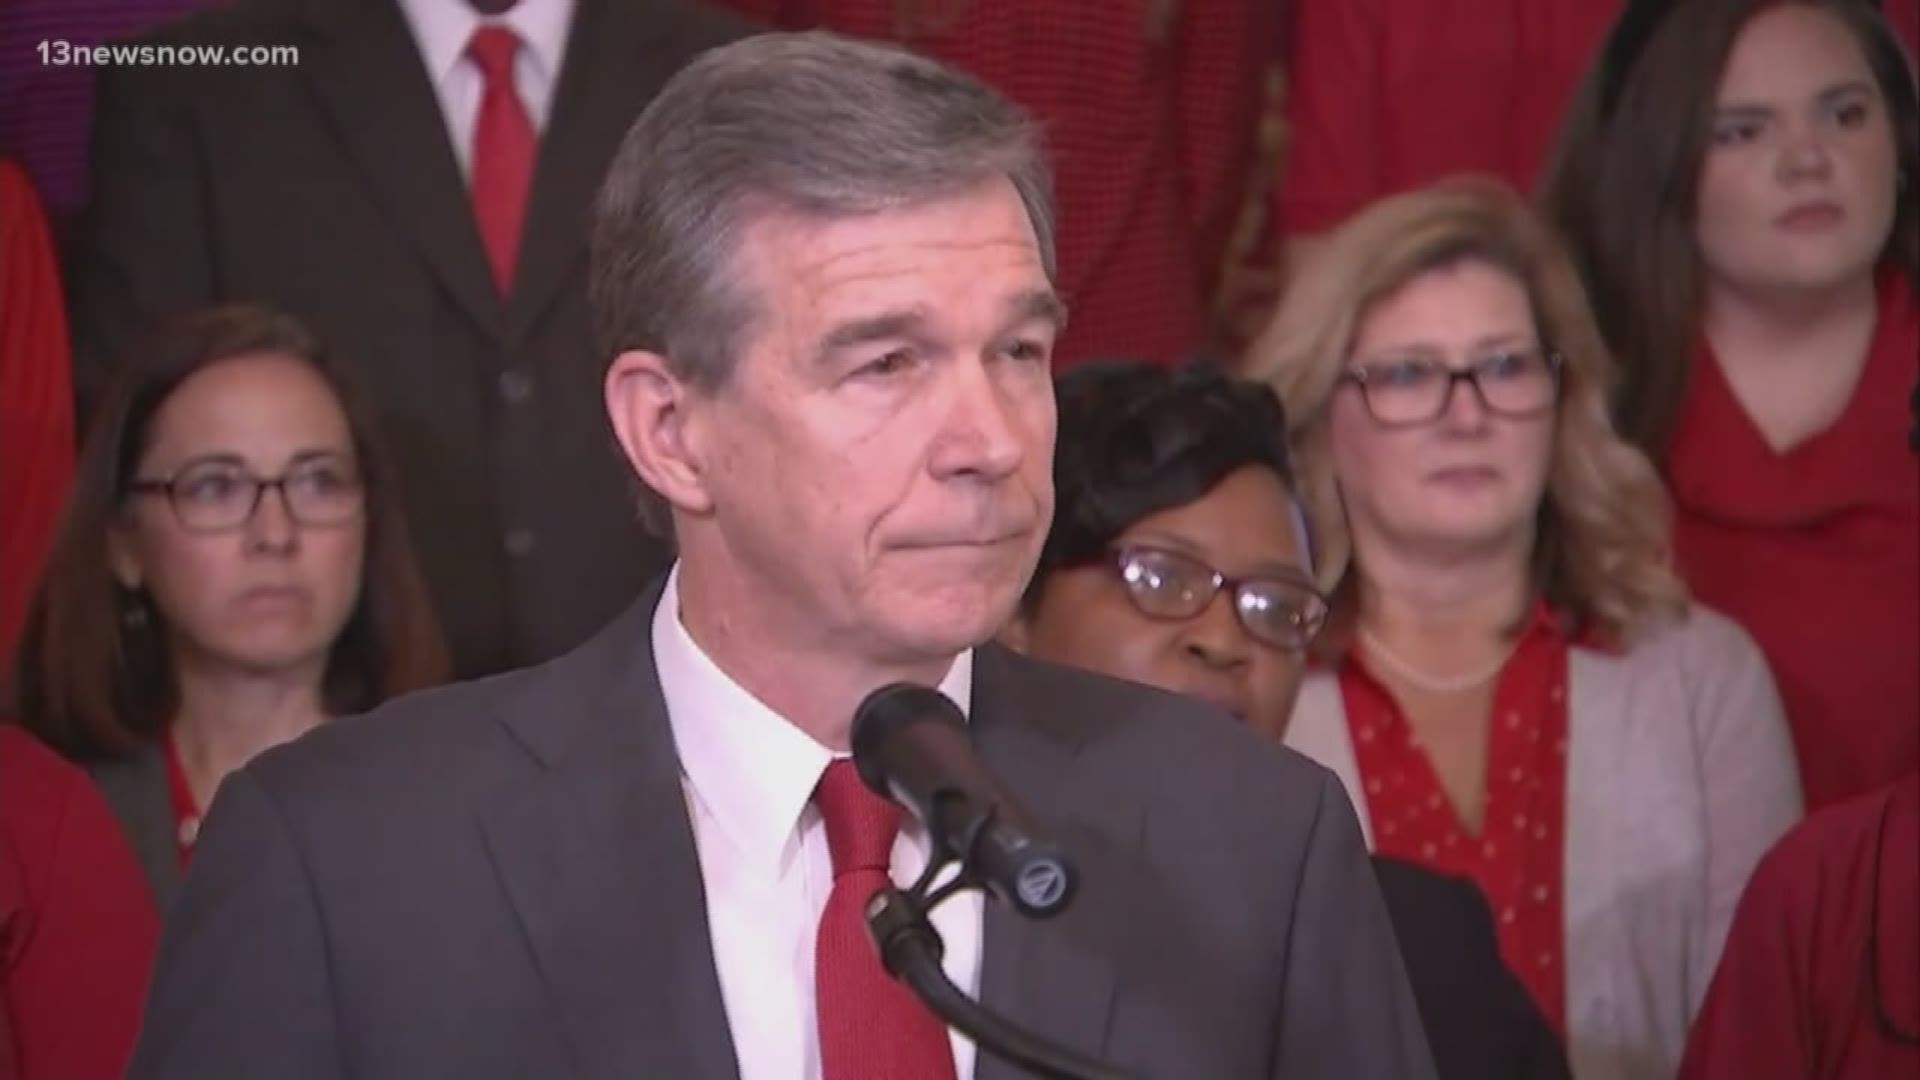 Governor Roy Cooper vetoed the 3.9% teacher pay raise over two years because he said it's not enough. He wants to see an 8.5% pay increase over the next two years.